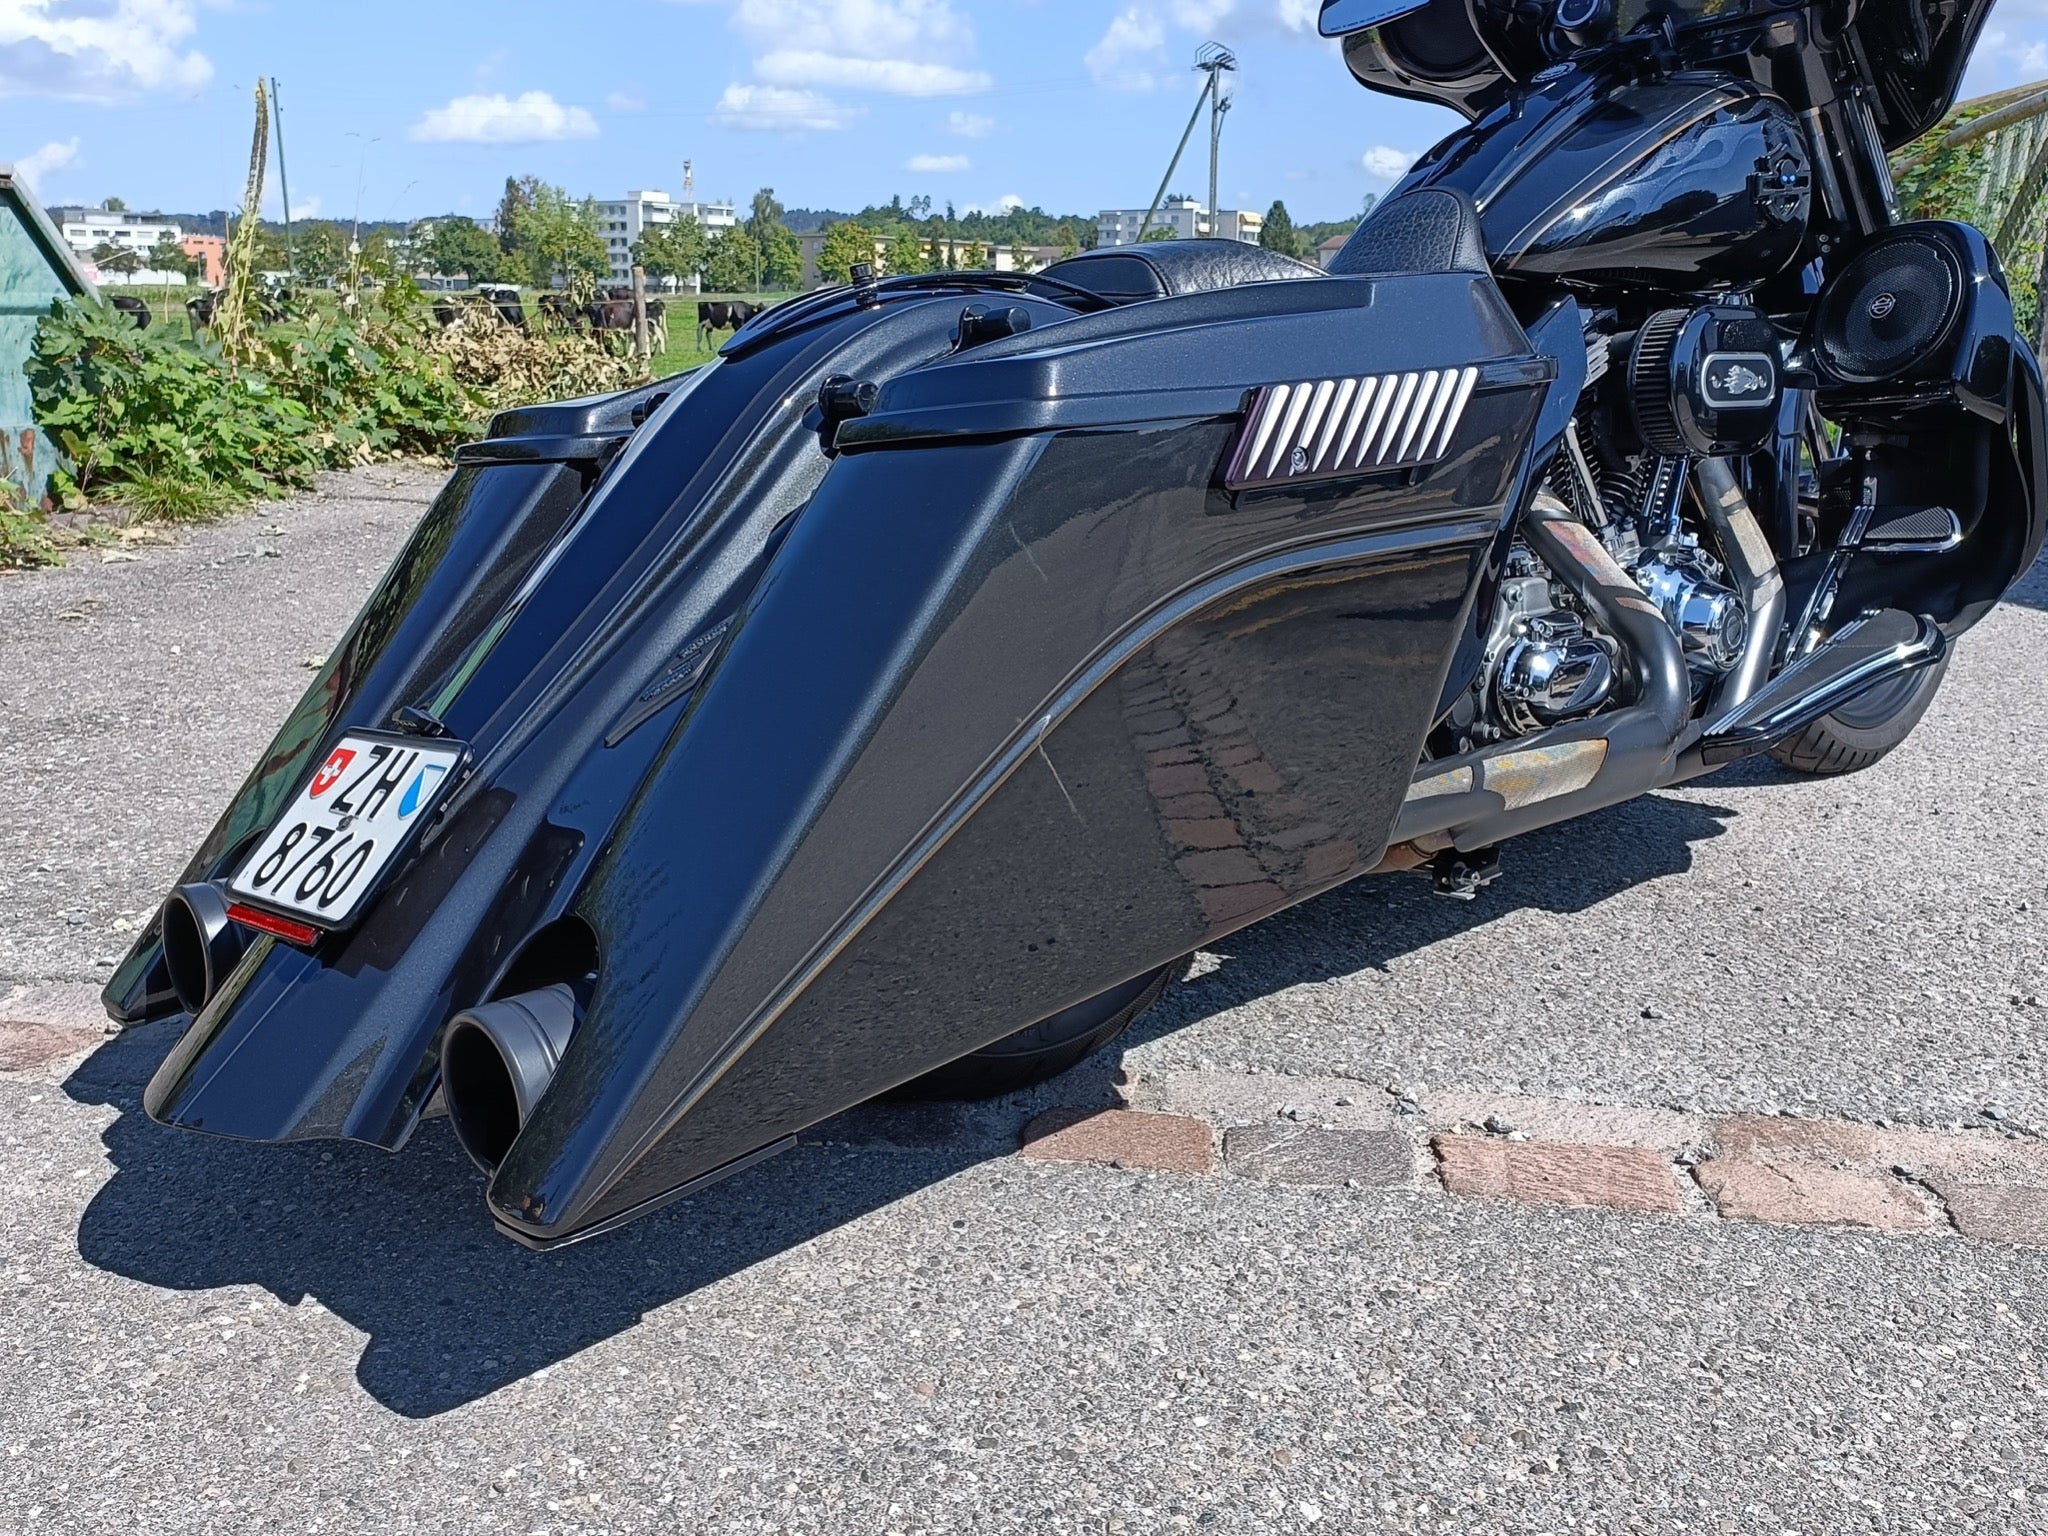 Stretched Saddlebags  Bad Dad  Custom Bagger Parts for Your Bagger